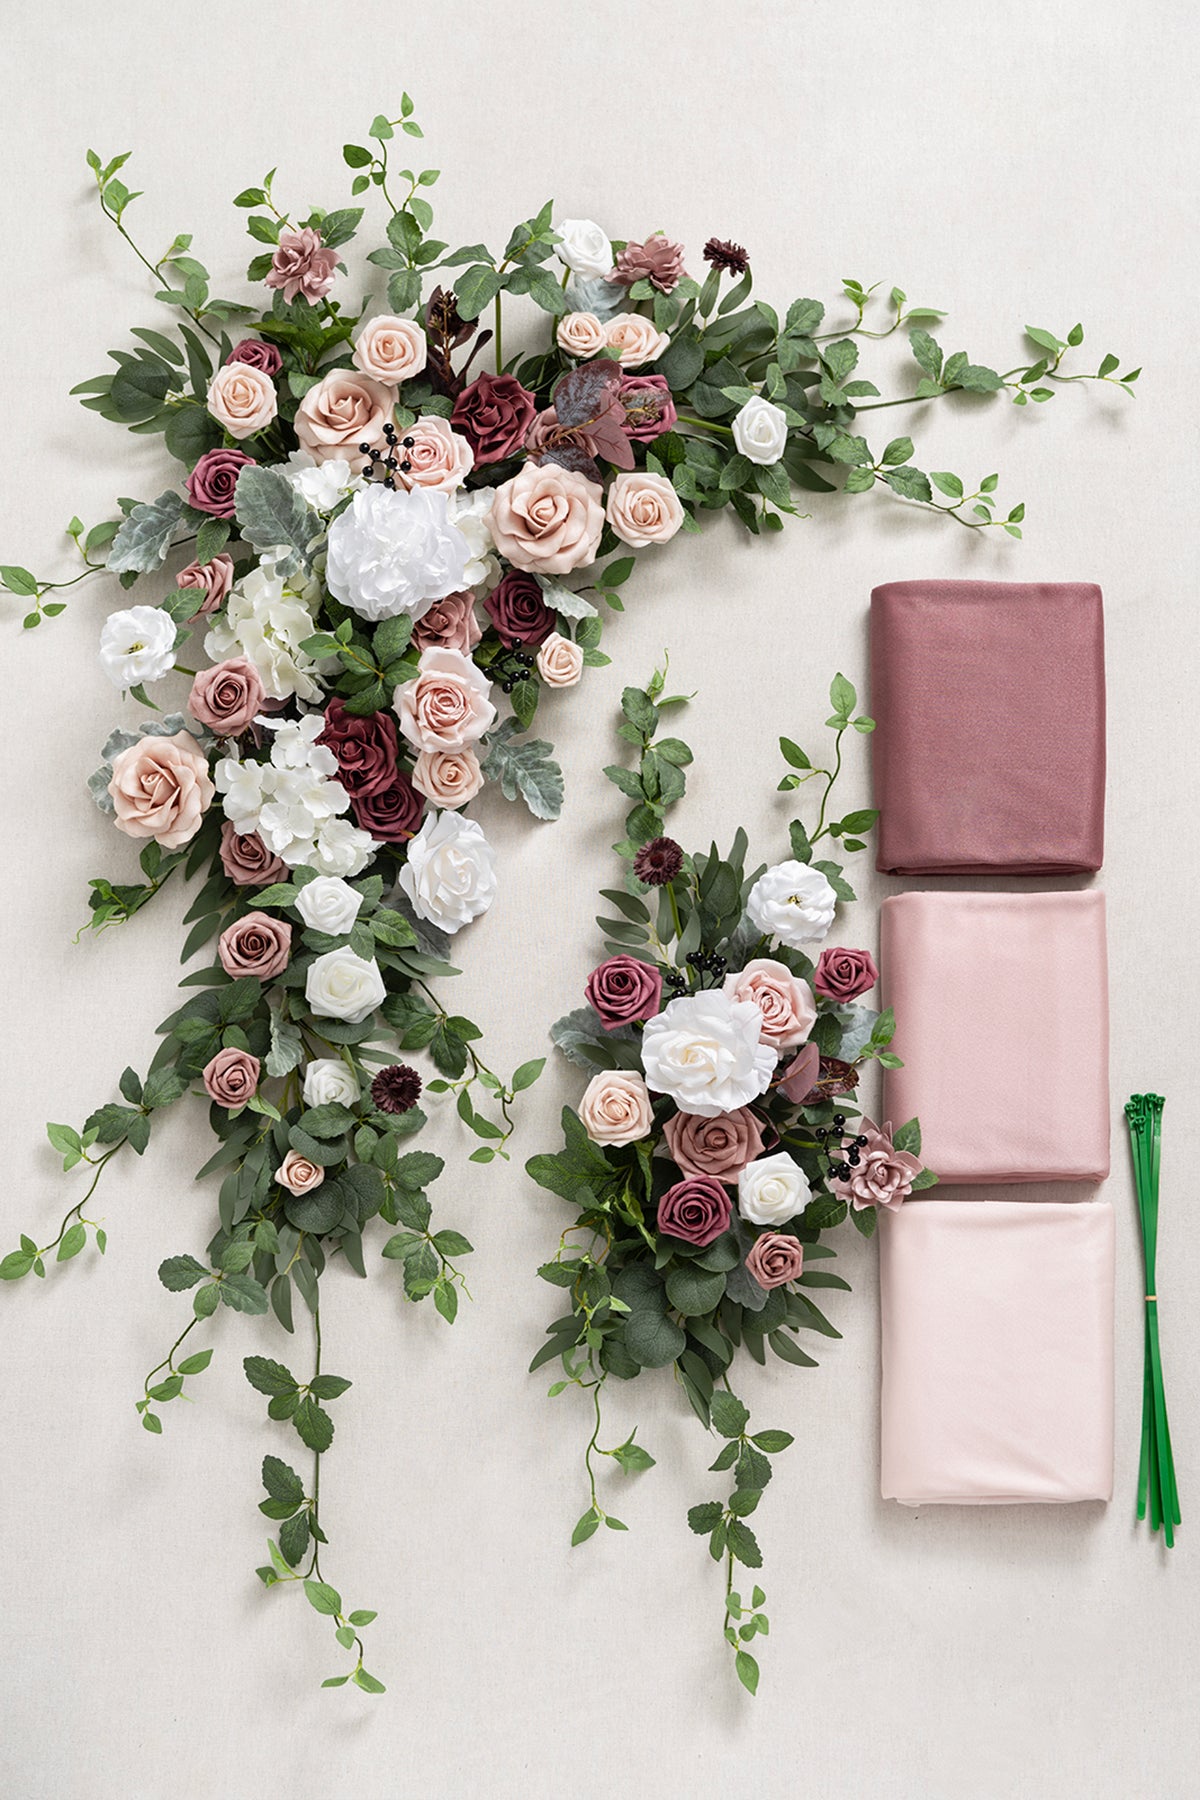 Flower Arch Decor with Drapes in Dusty Rose & Mauve